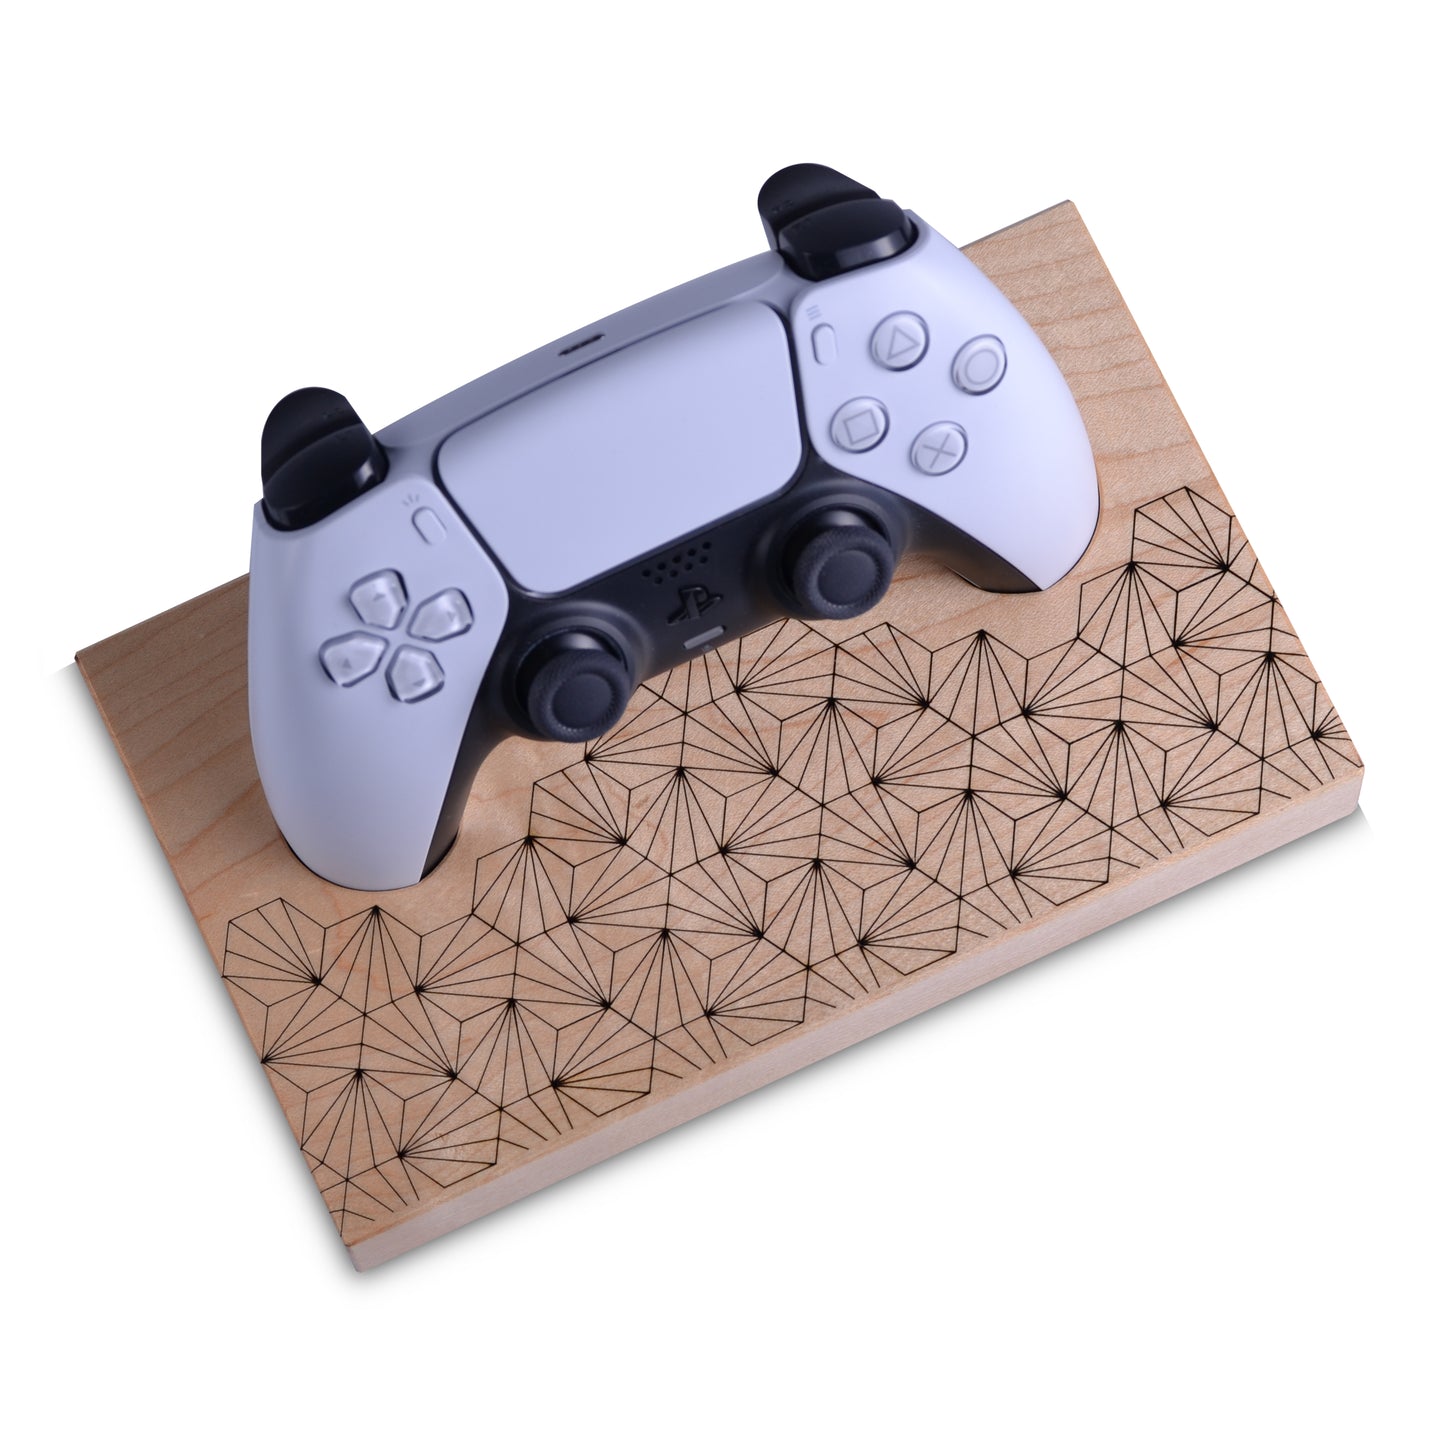 Wooden stand with geometric pattern for Playstation 5 dualsense controller